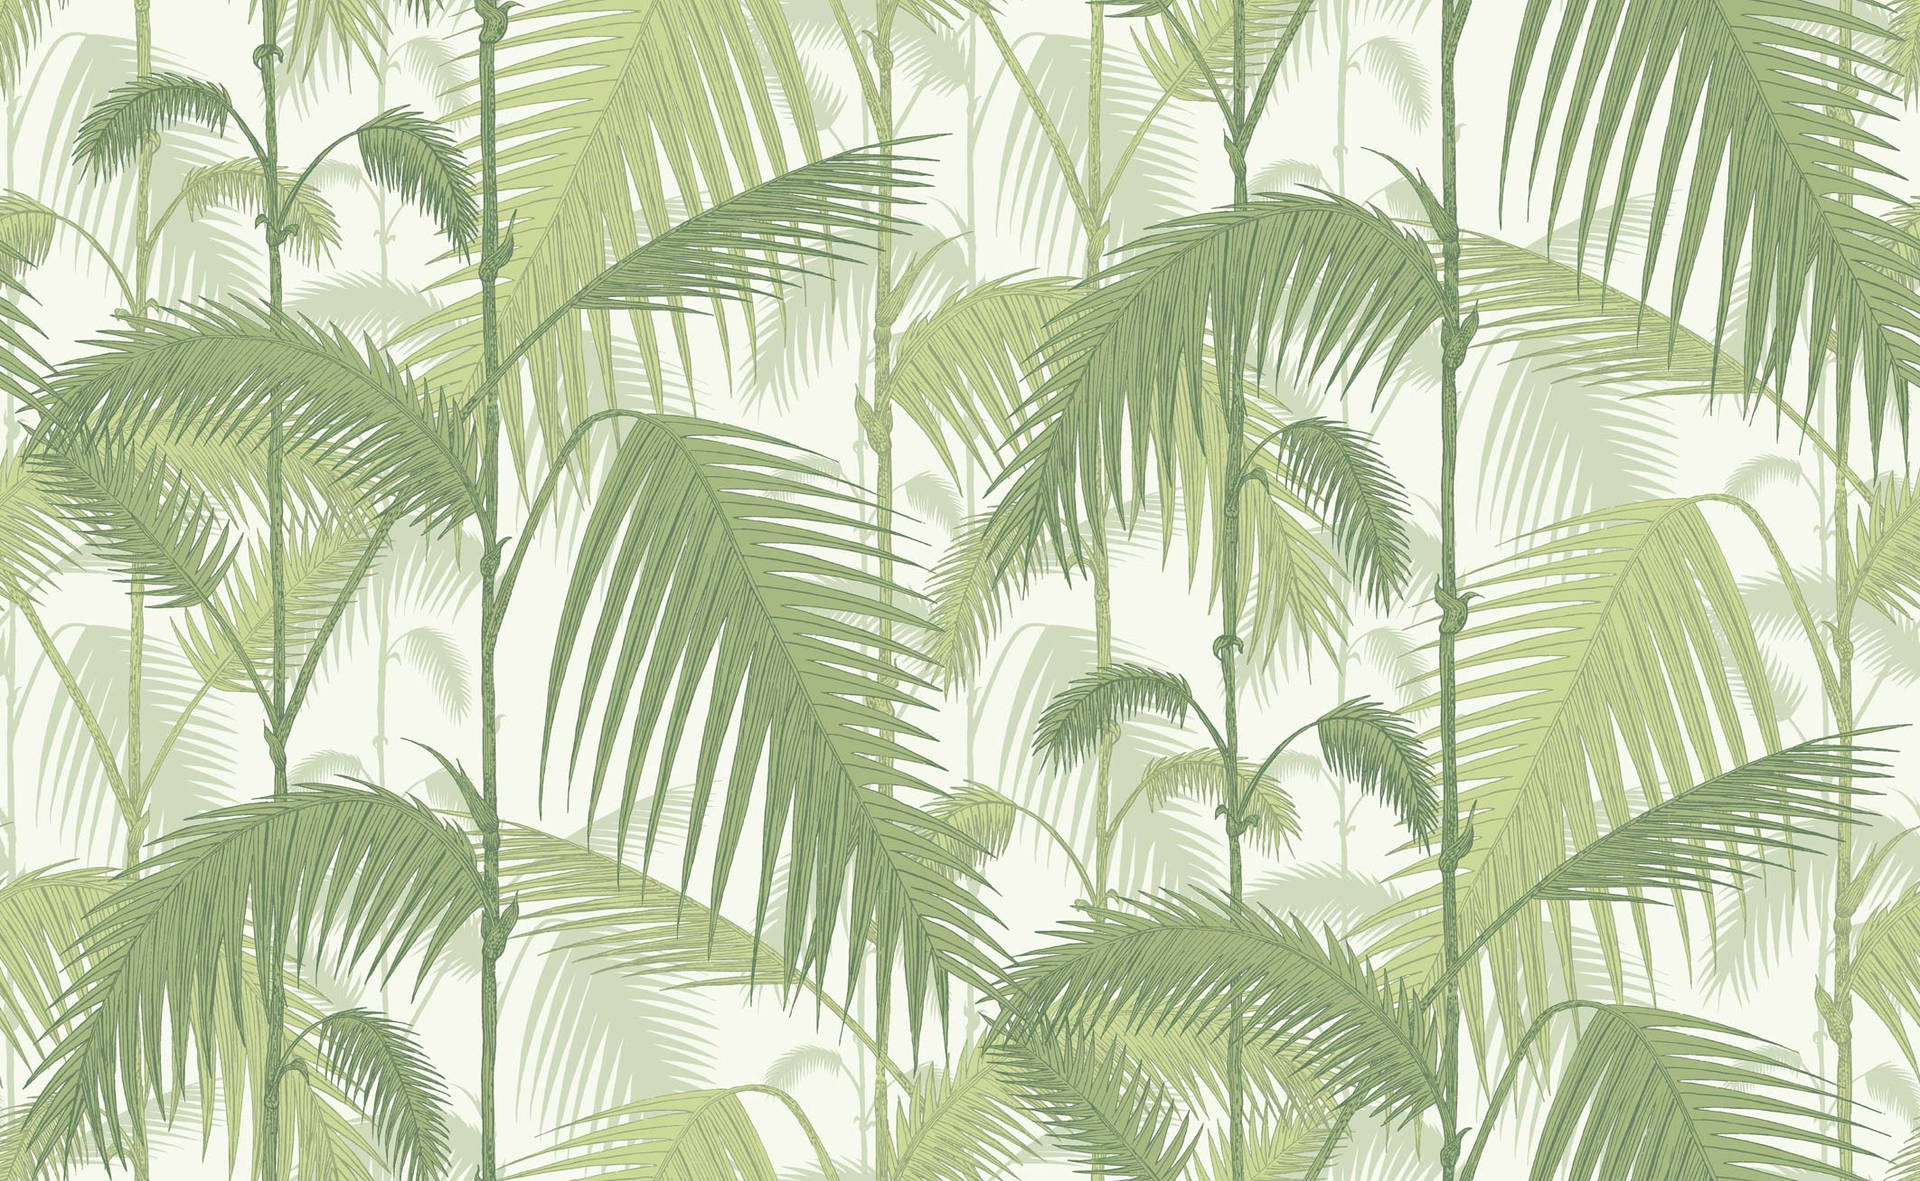 "Take in the beauty of nature with this stunning Cole&Son Palm Jungle wallpaper." Wallpaper